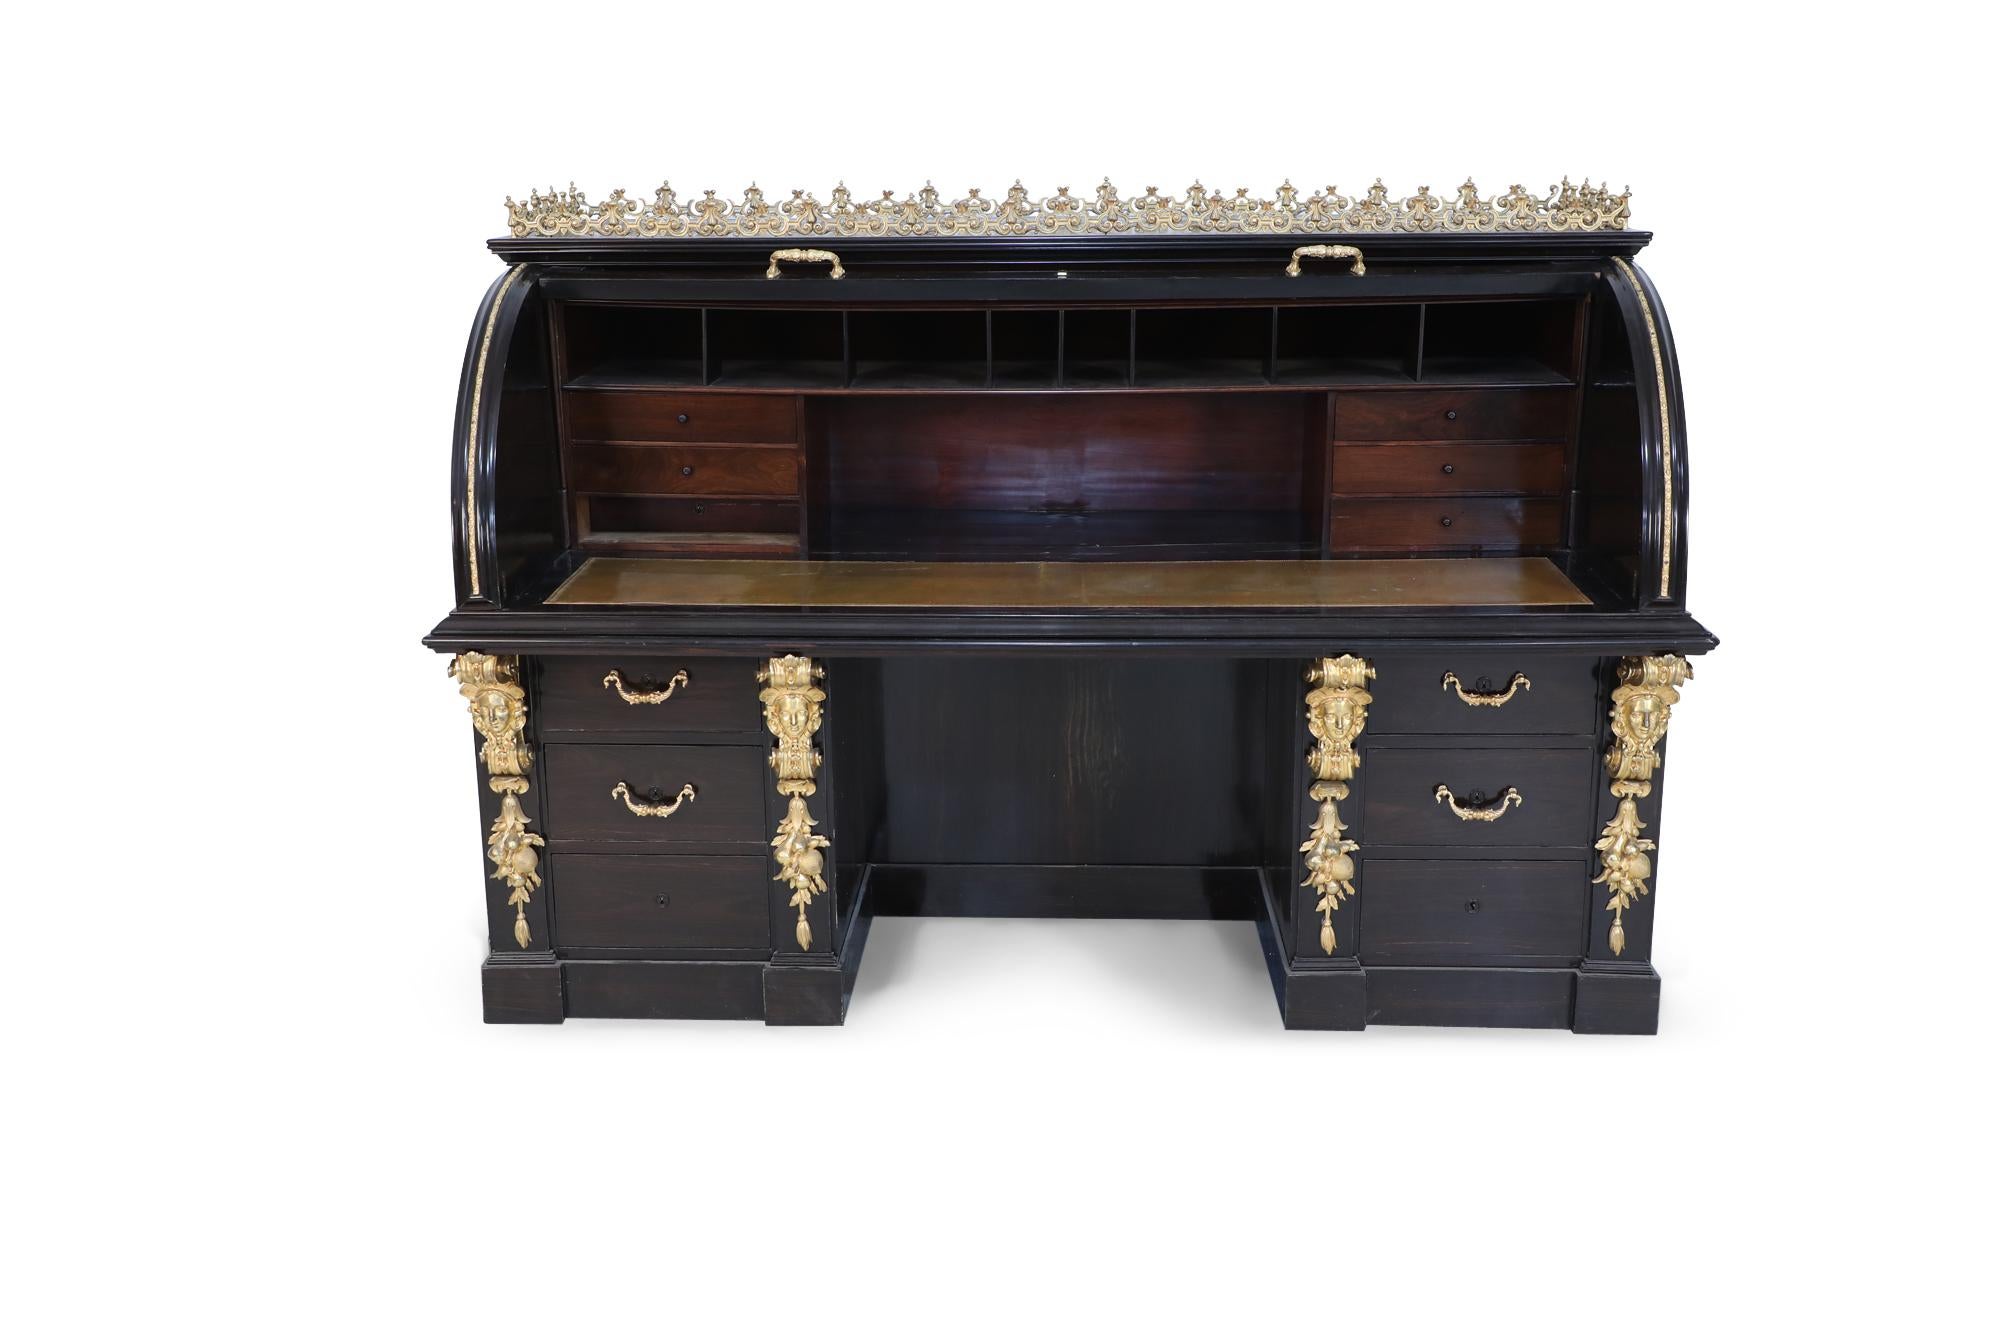 19th century Empire style English dark-brown wooden desk with roll top that opens to reveal drawers and letter holders and a gold embossed leather desk surface, topped with a bronze-filigree framed tray, and supported by two columns of drawers, each